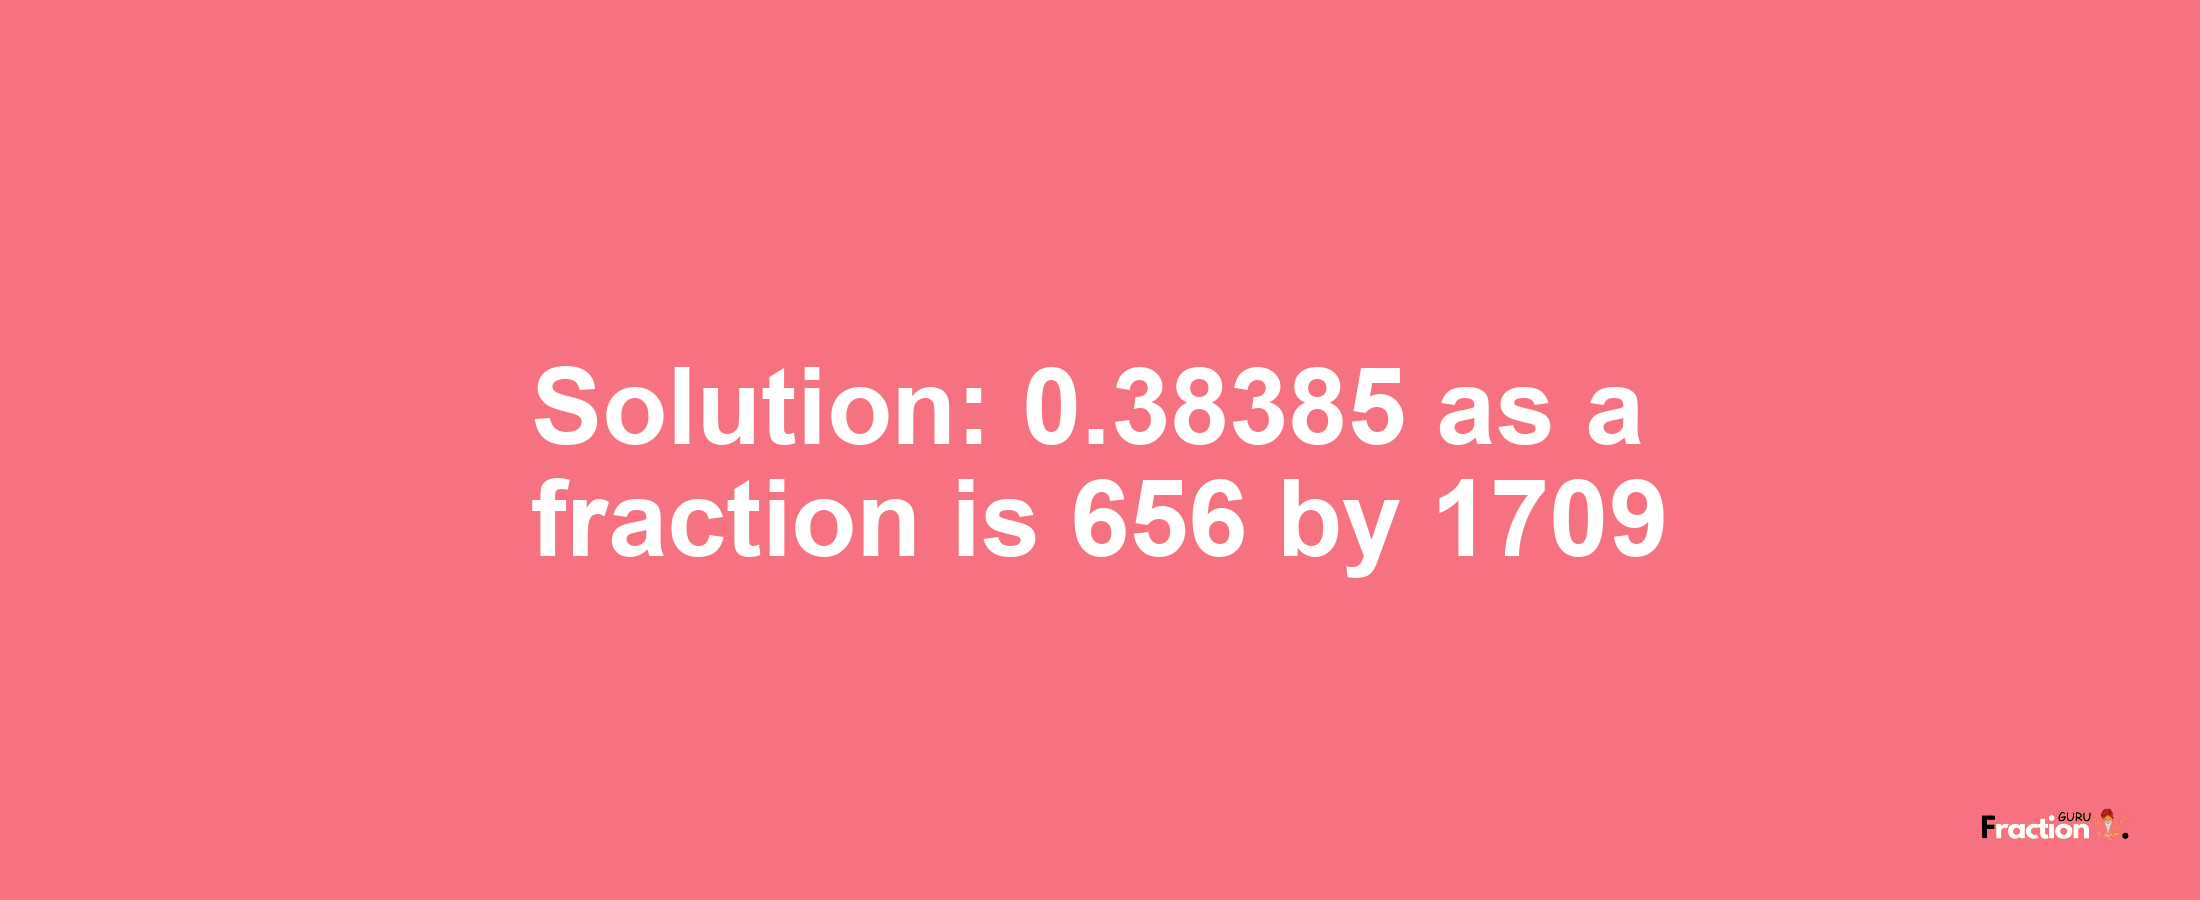 Solution:0.38385 as a fraction is 656/1709